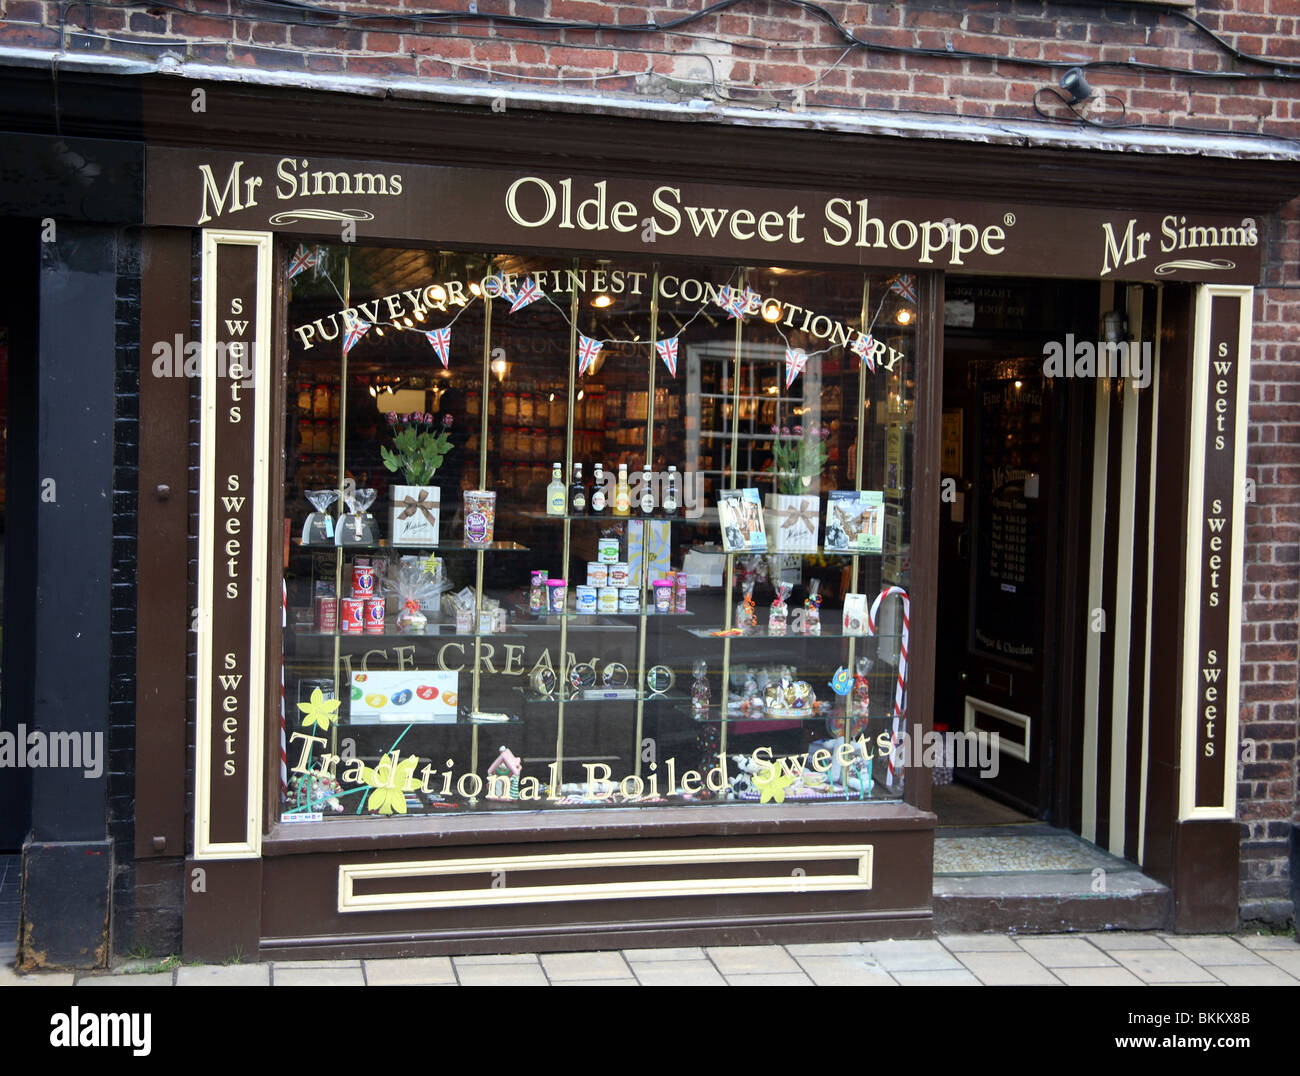 Olde sweet shoppe in the town of Knutsford Cheshire UK Stock Photo